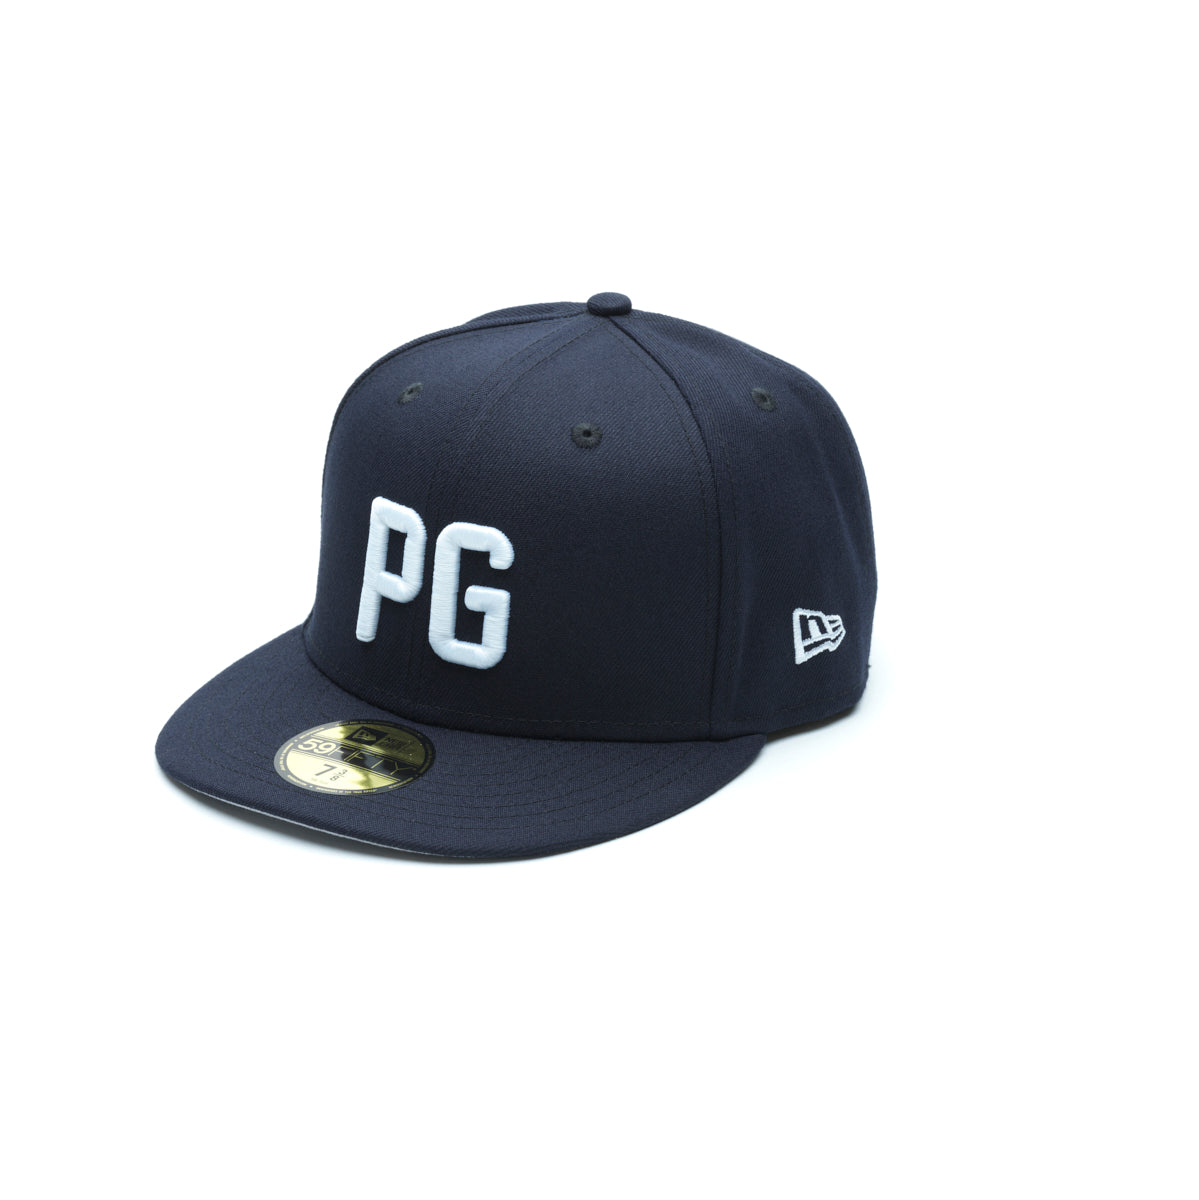 PG/New Era Navy Fitted